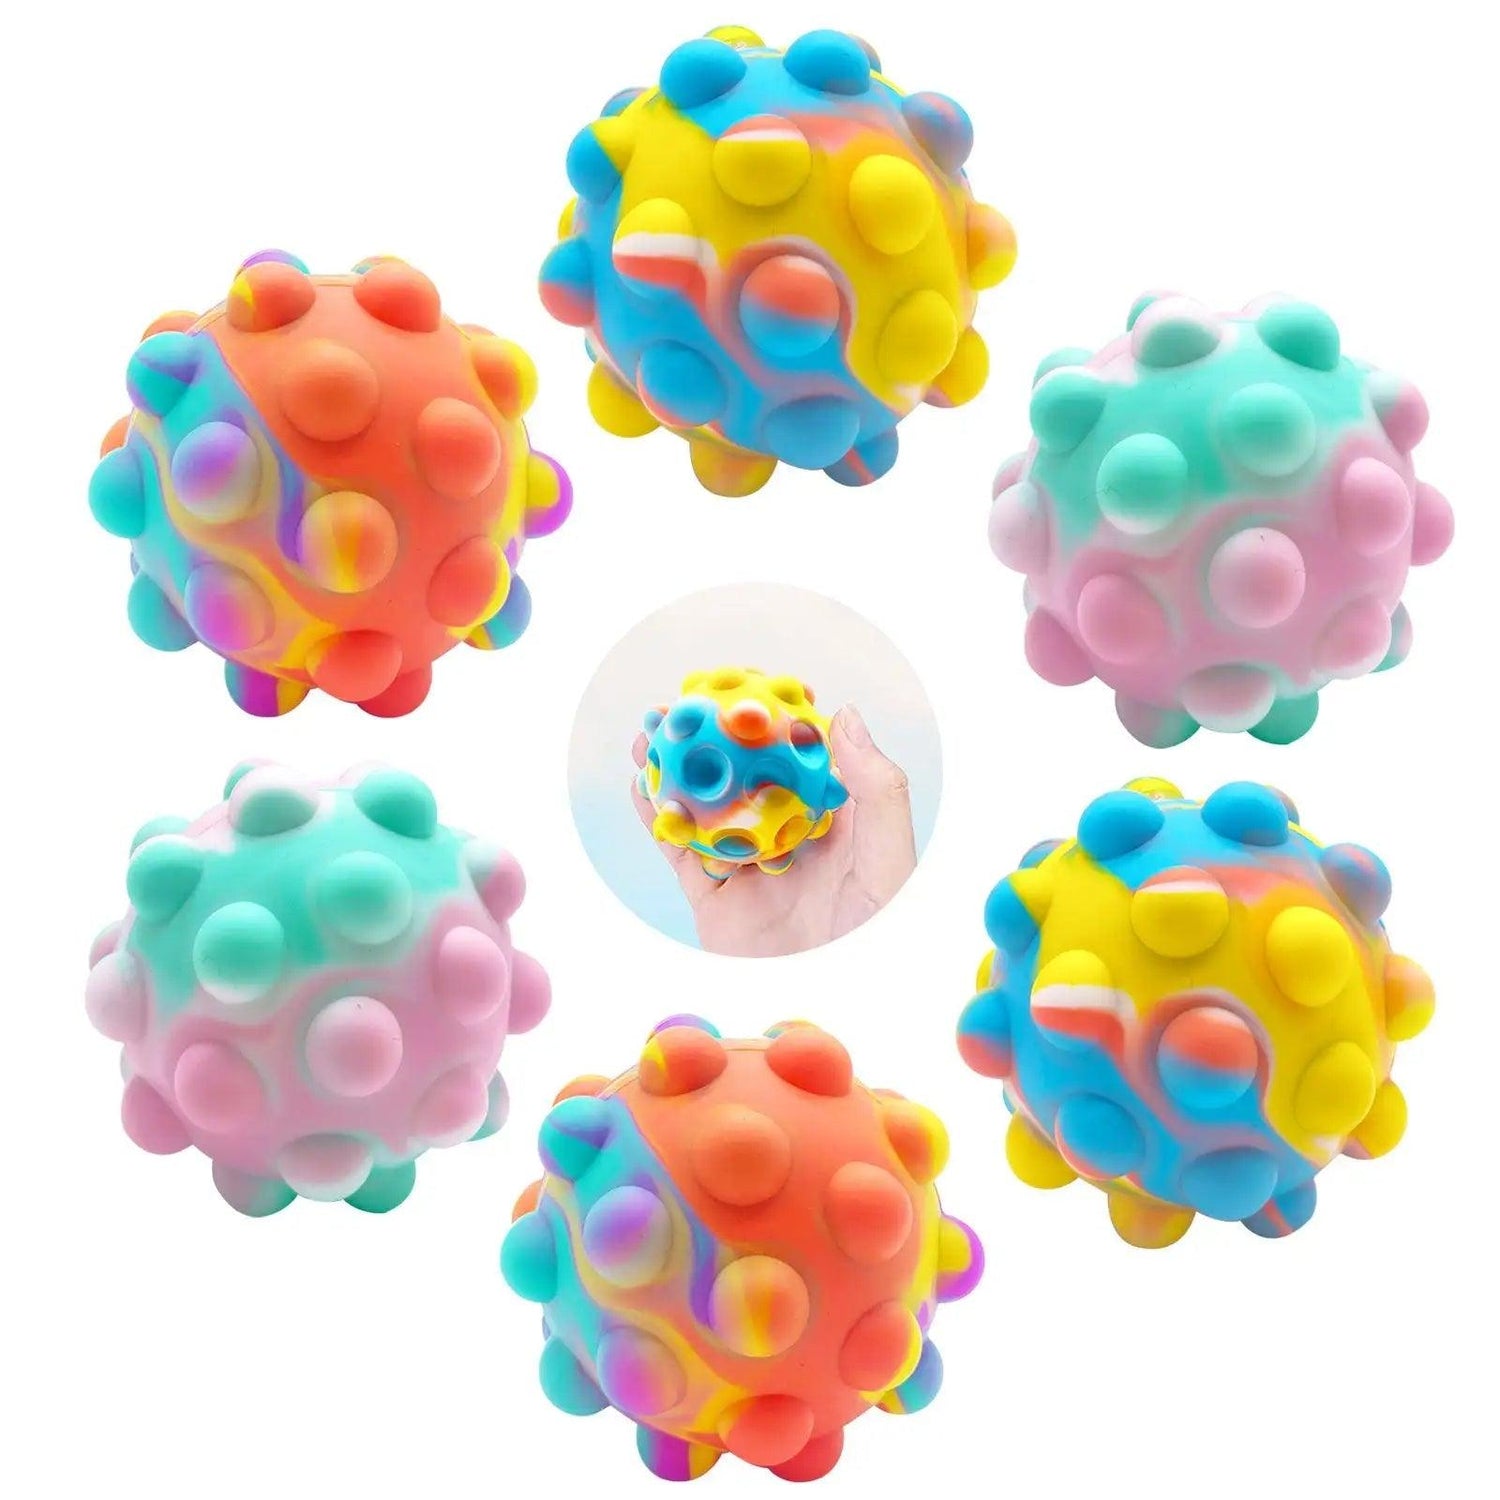 Have you ever played tie-dye pressure silicone sensory game balls? - Cykapu